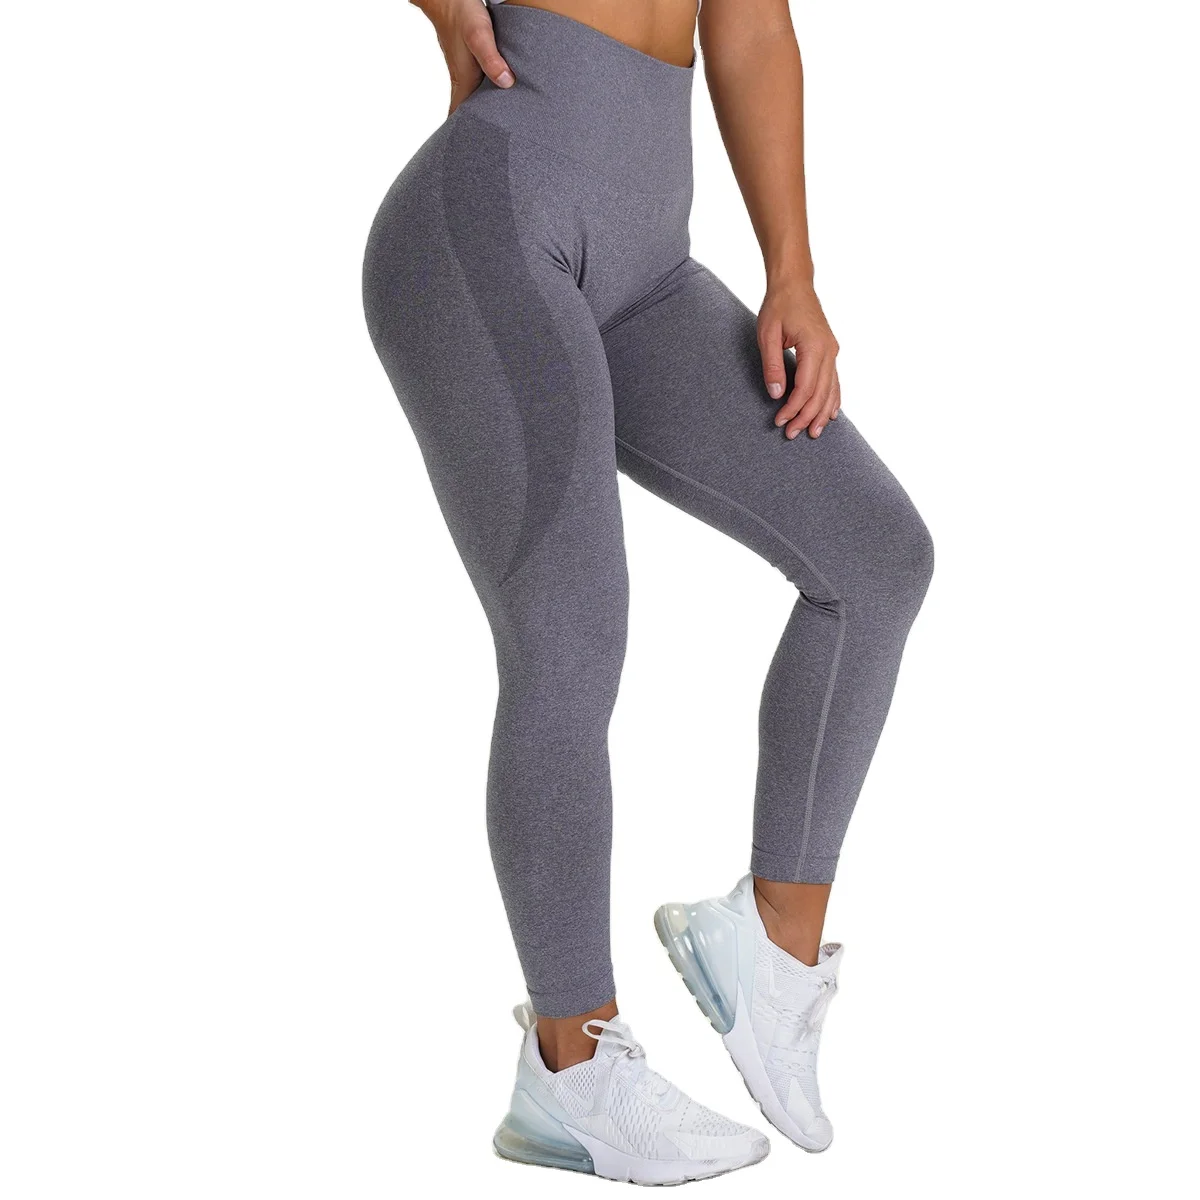 

Summer 2021 Casual Skinny High Waisted Fitness Yoga Pants Solid Color Yoga Workout Legging Women Pants, Picture shows